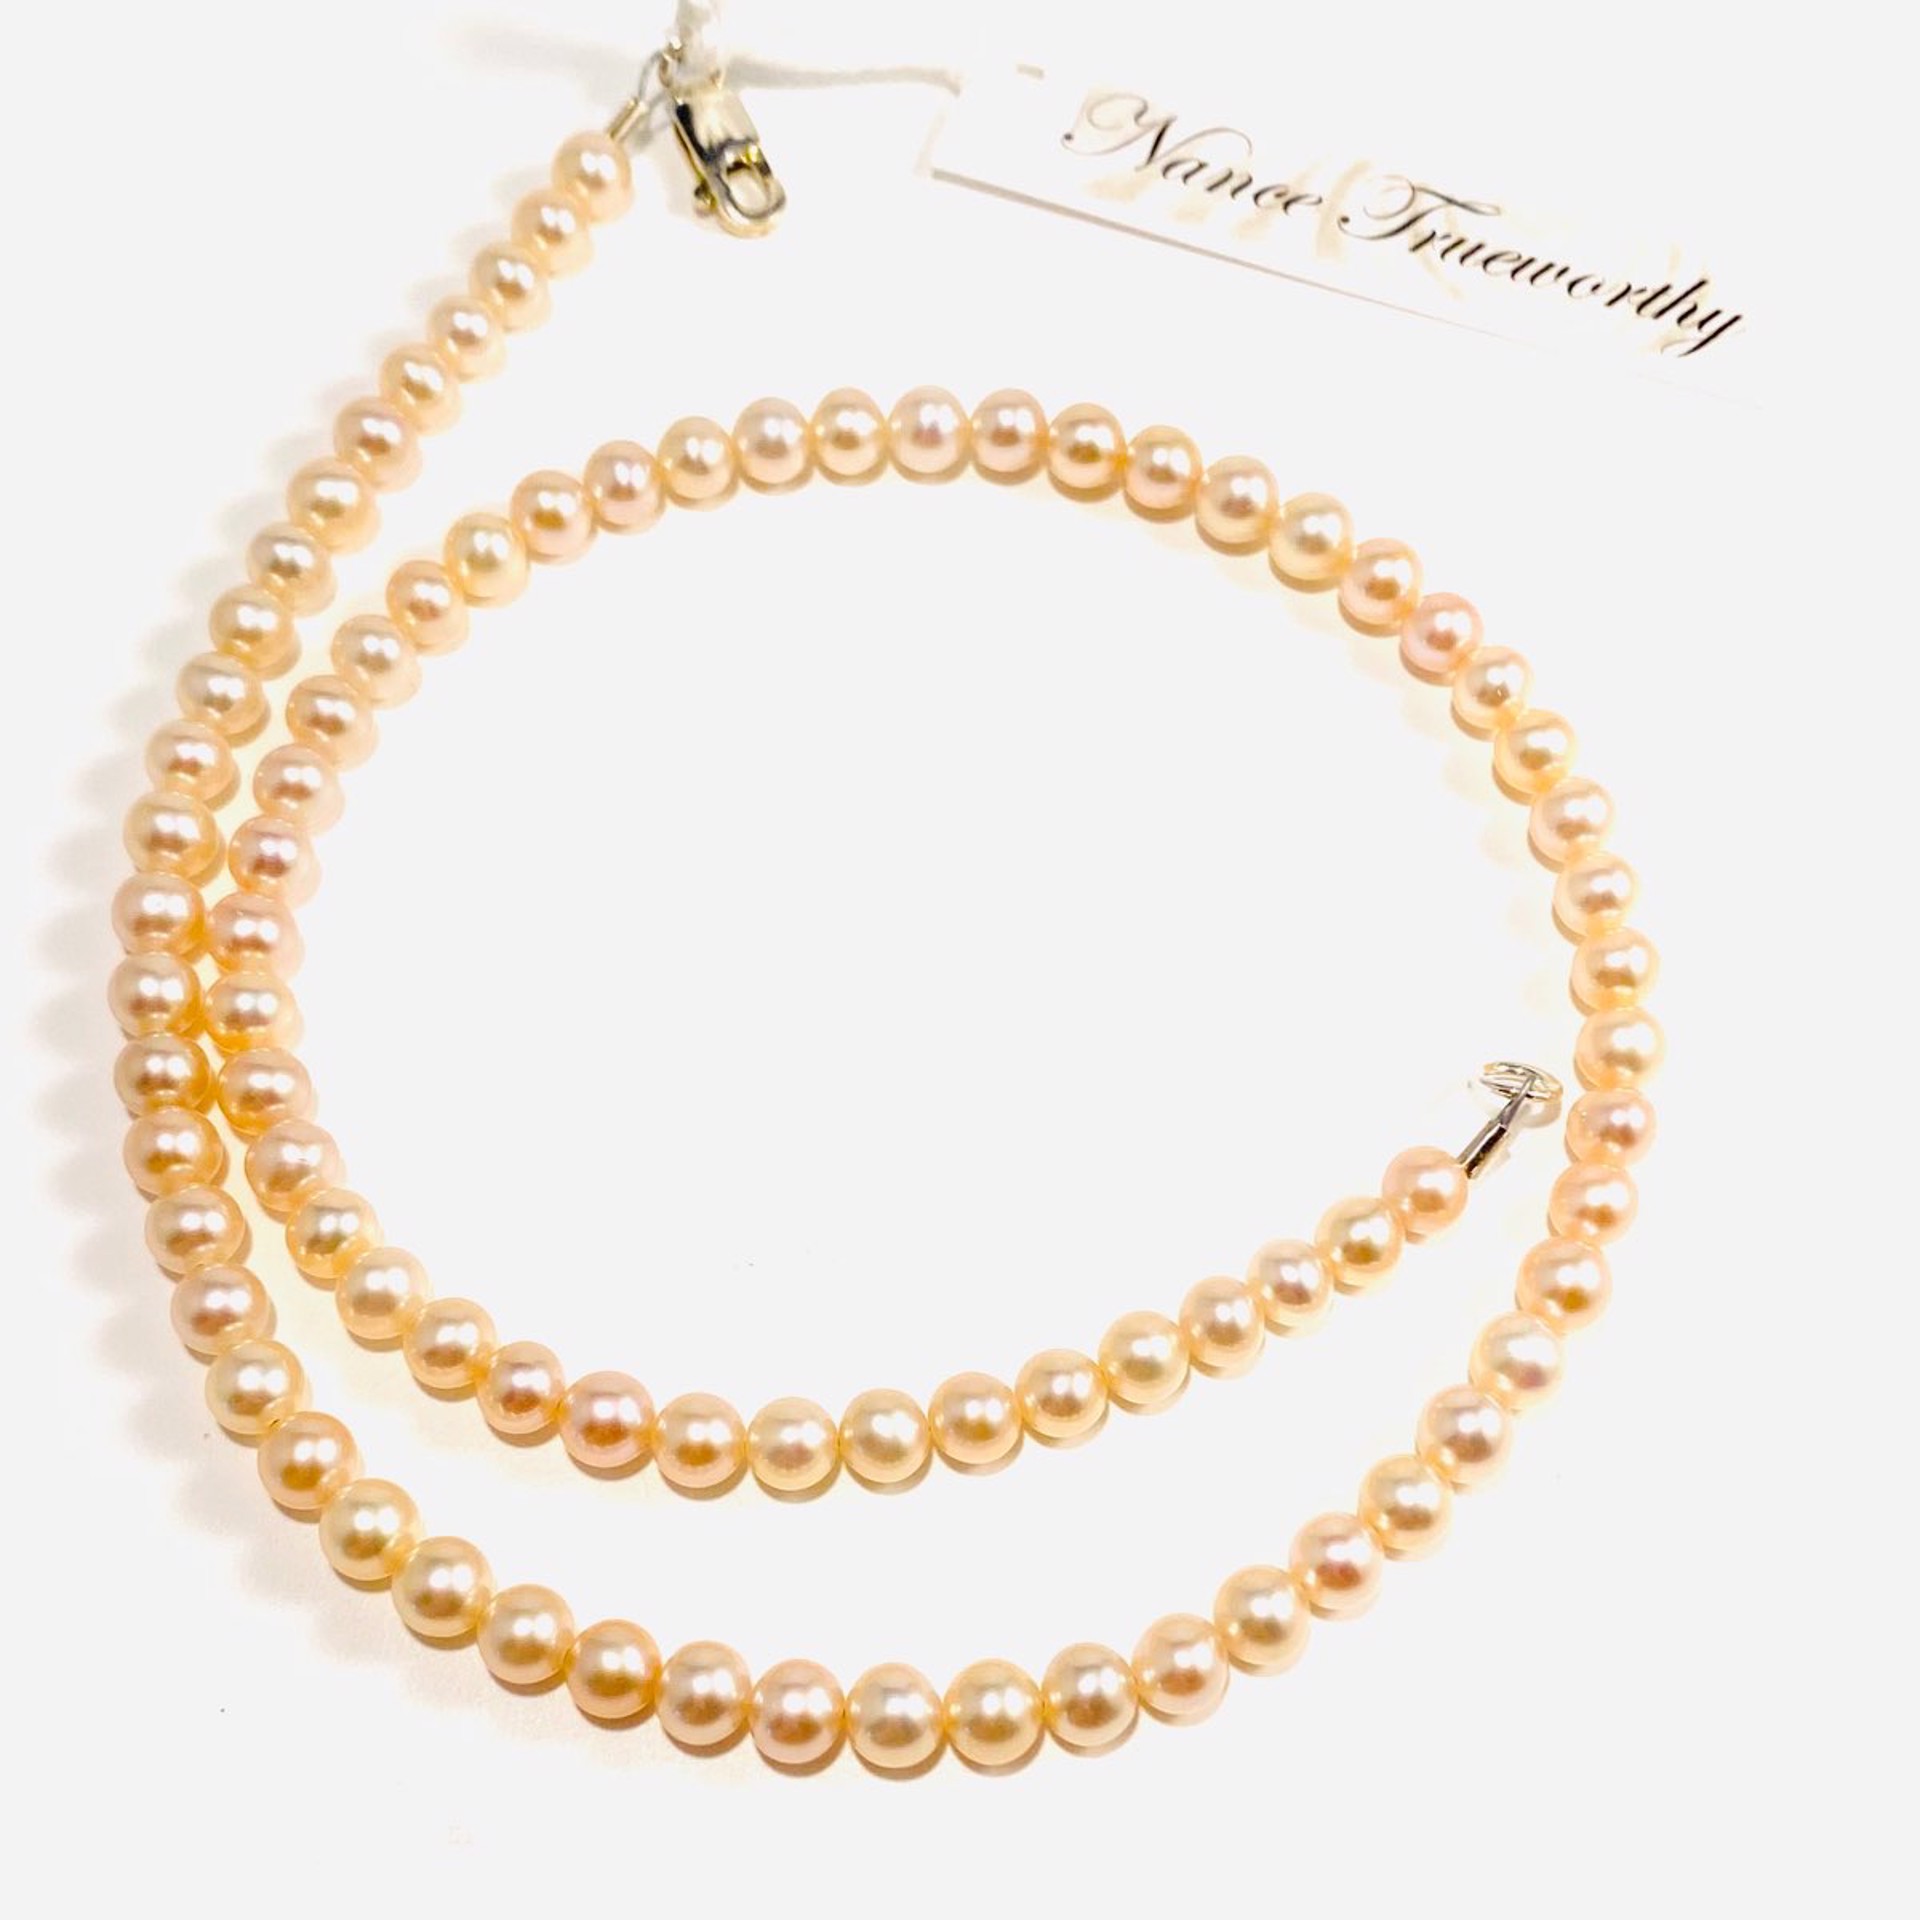 NT22-157 Pink Pearl Strand Necklace by Nance Trueworthy